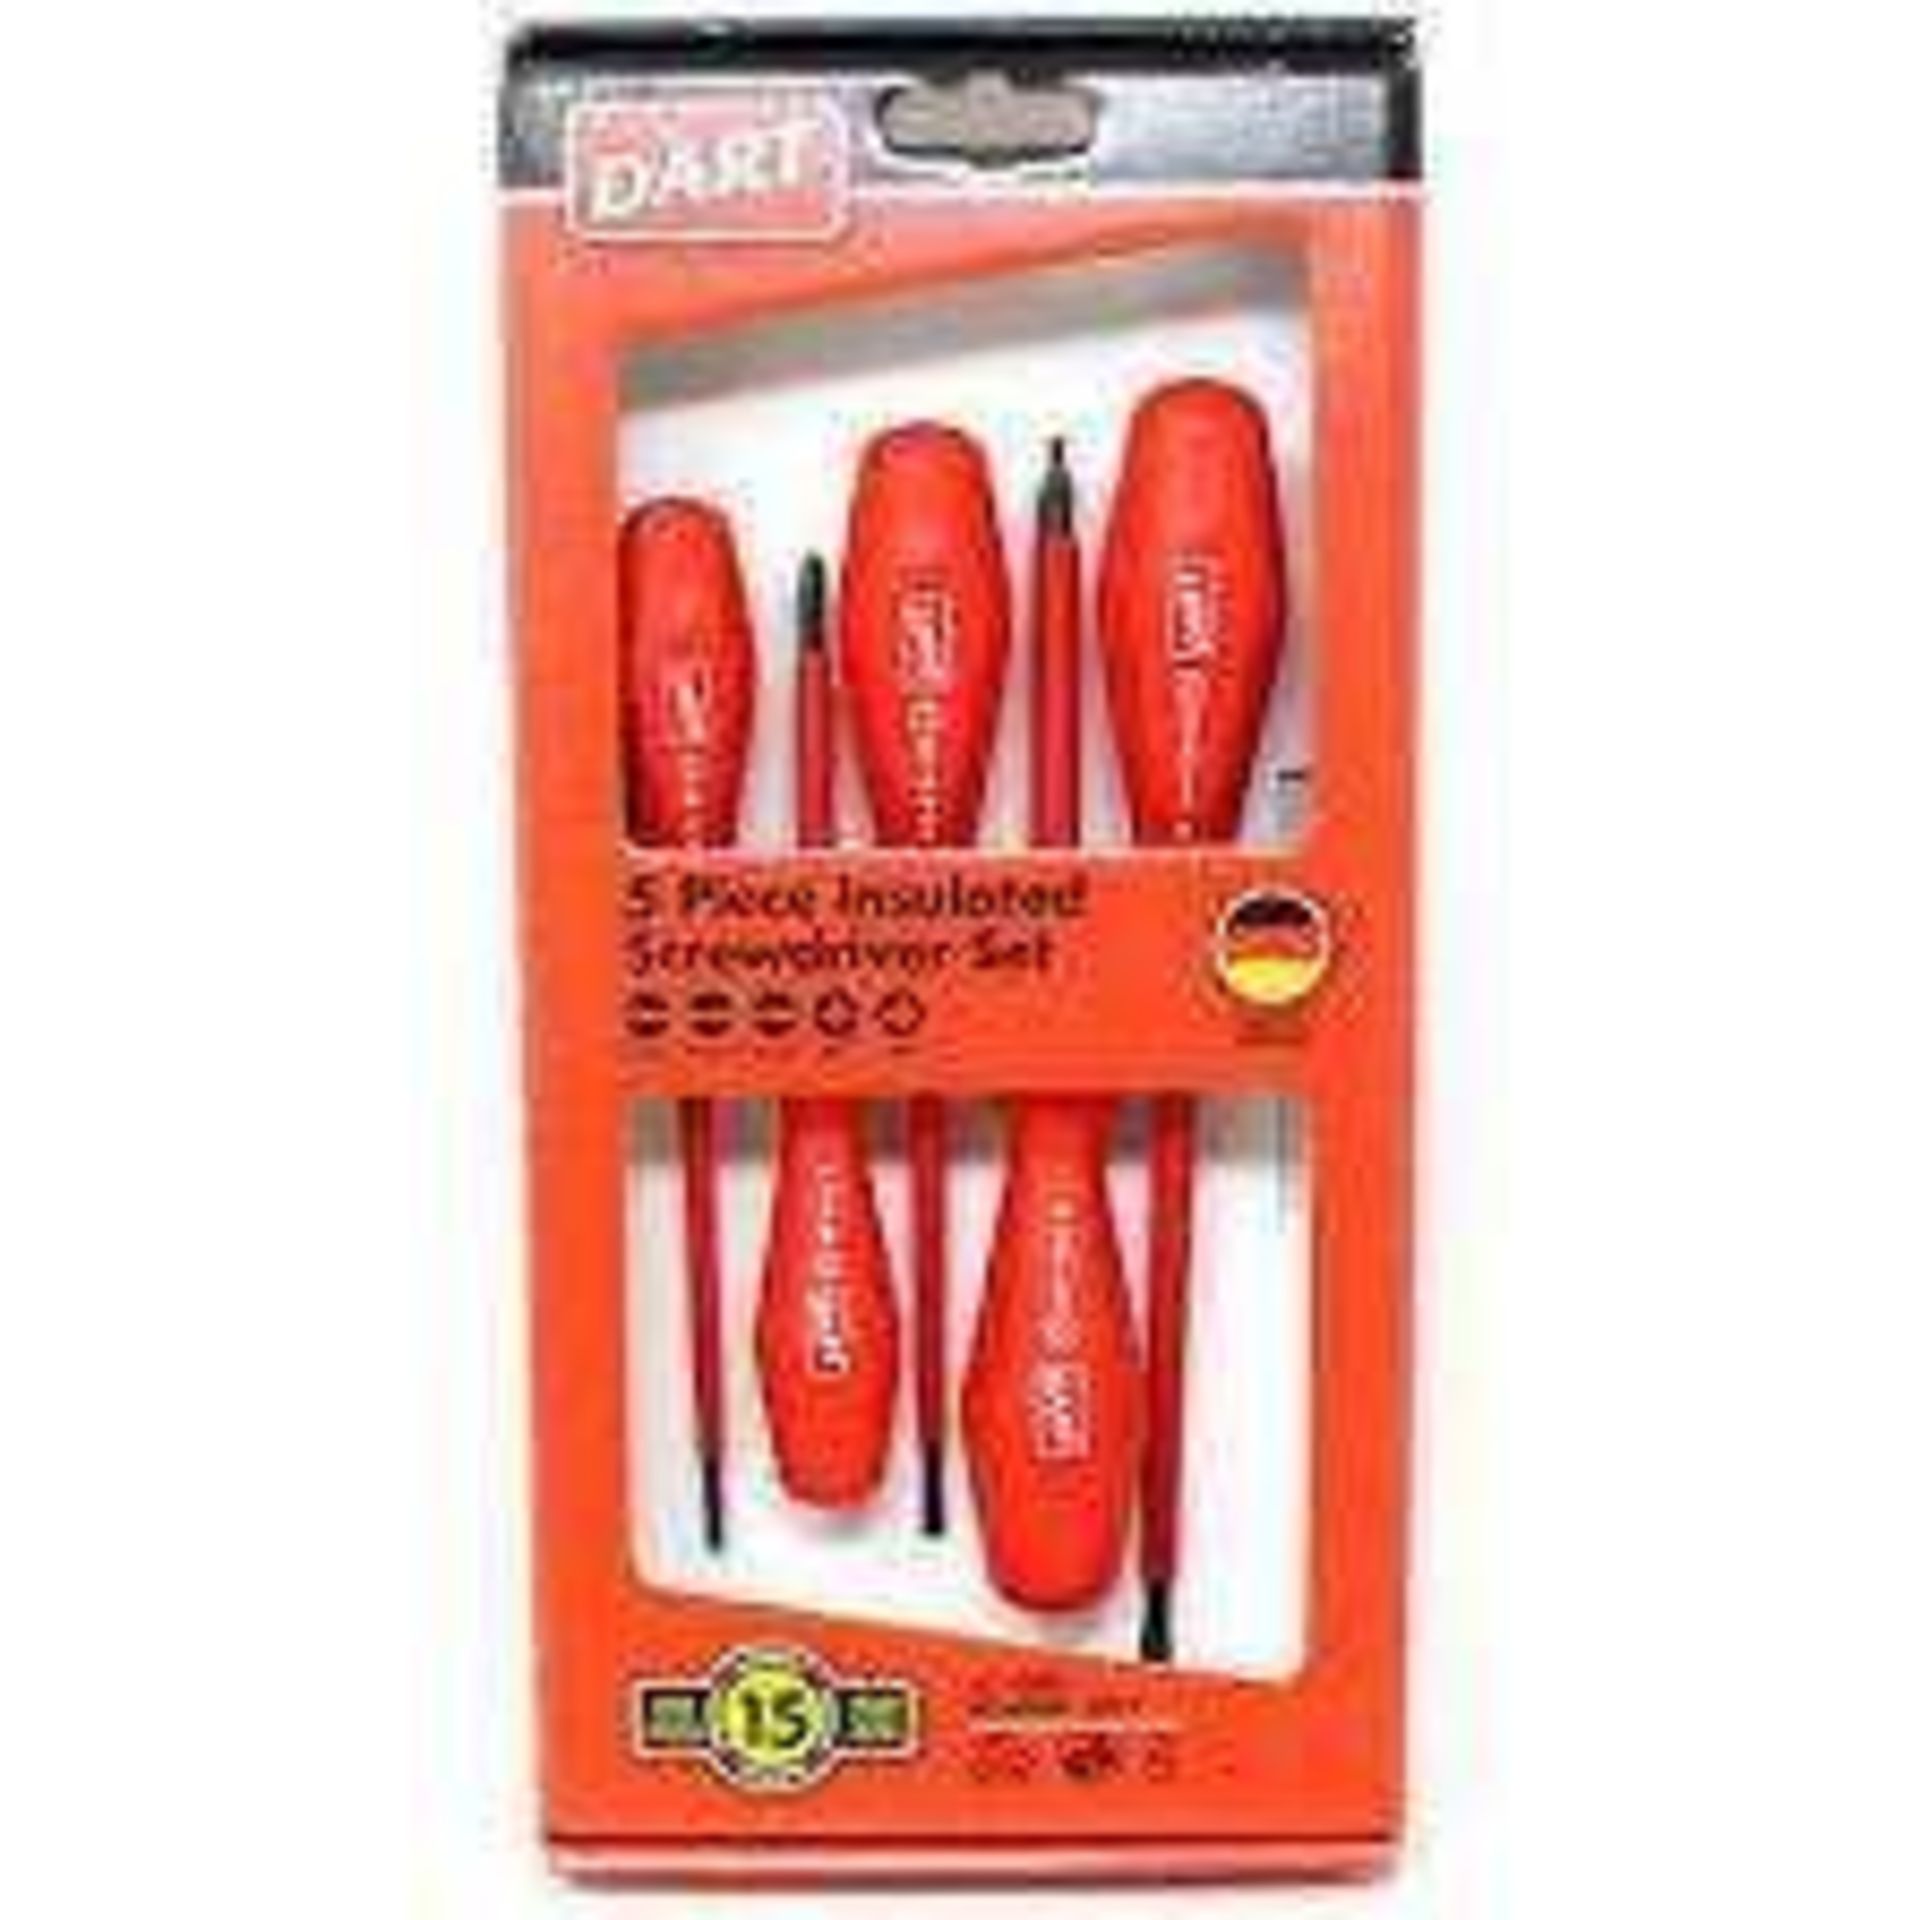 Combined Rrp £90 Lot To Contain 3 Brand New 5 Piece Insulated Screwdriver Set